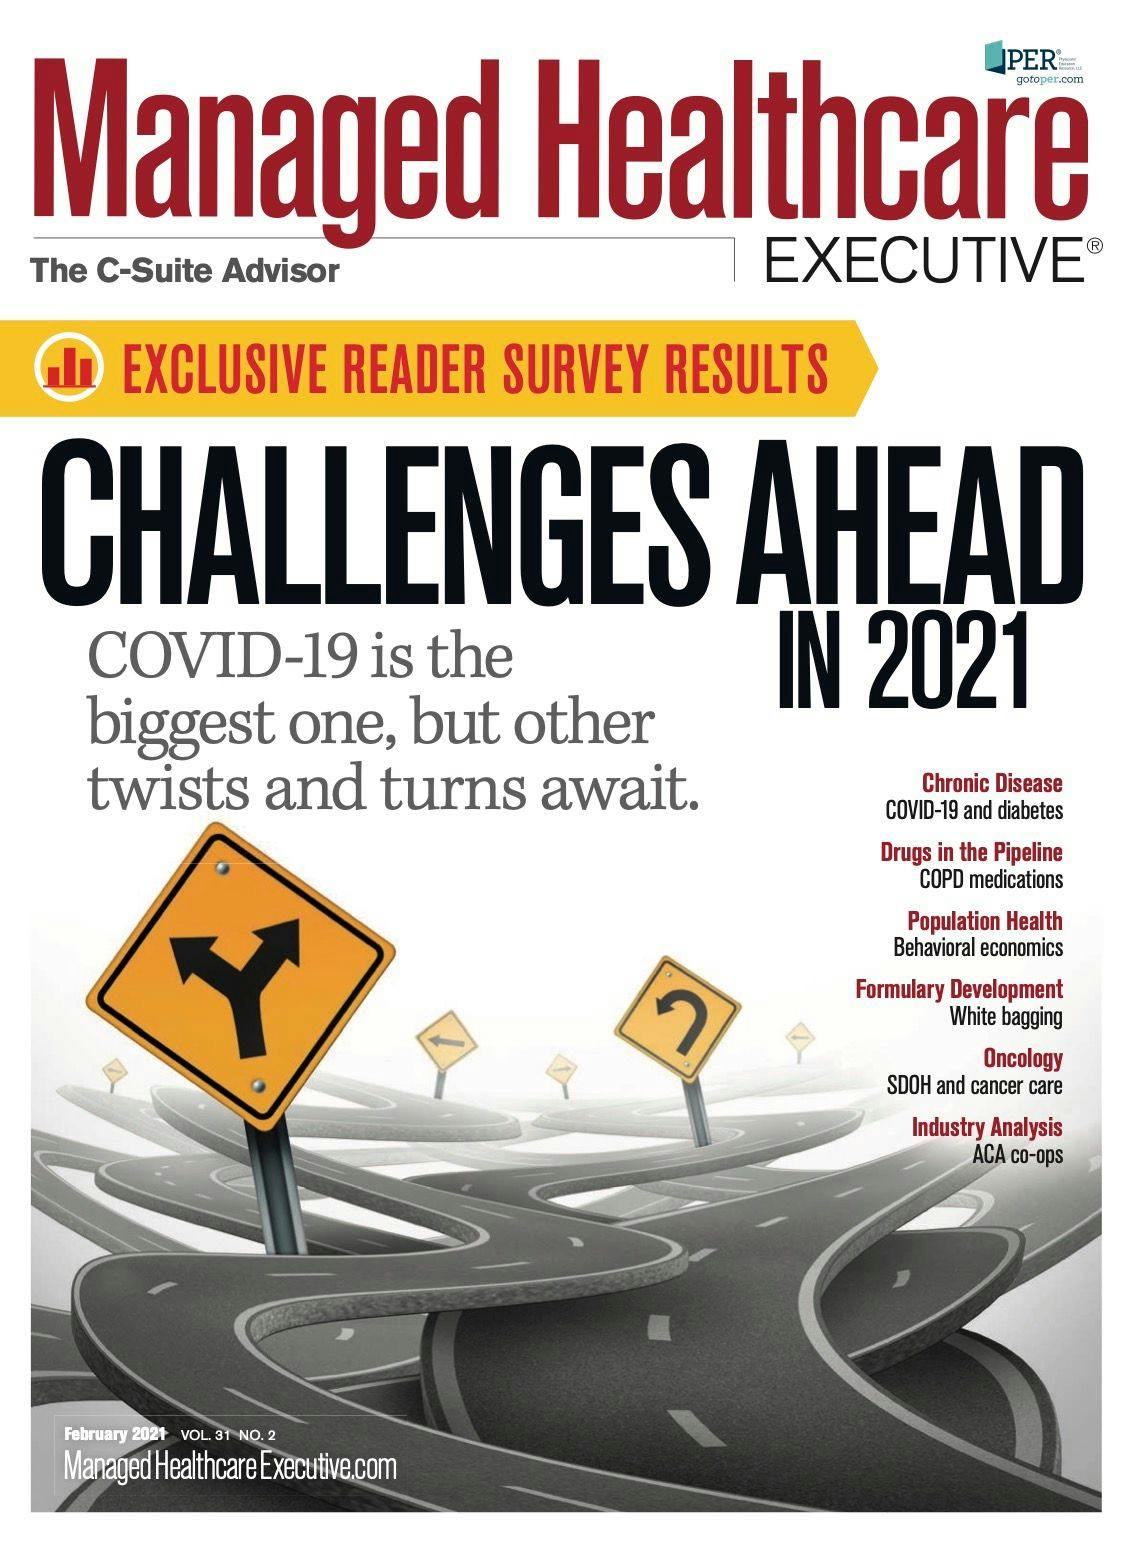 Challenges Ahead in 2021